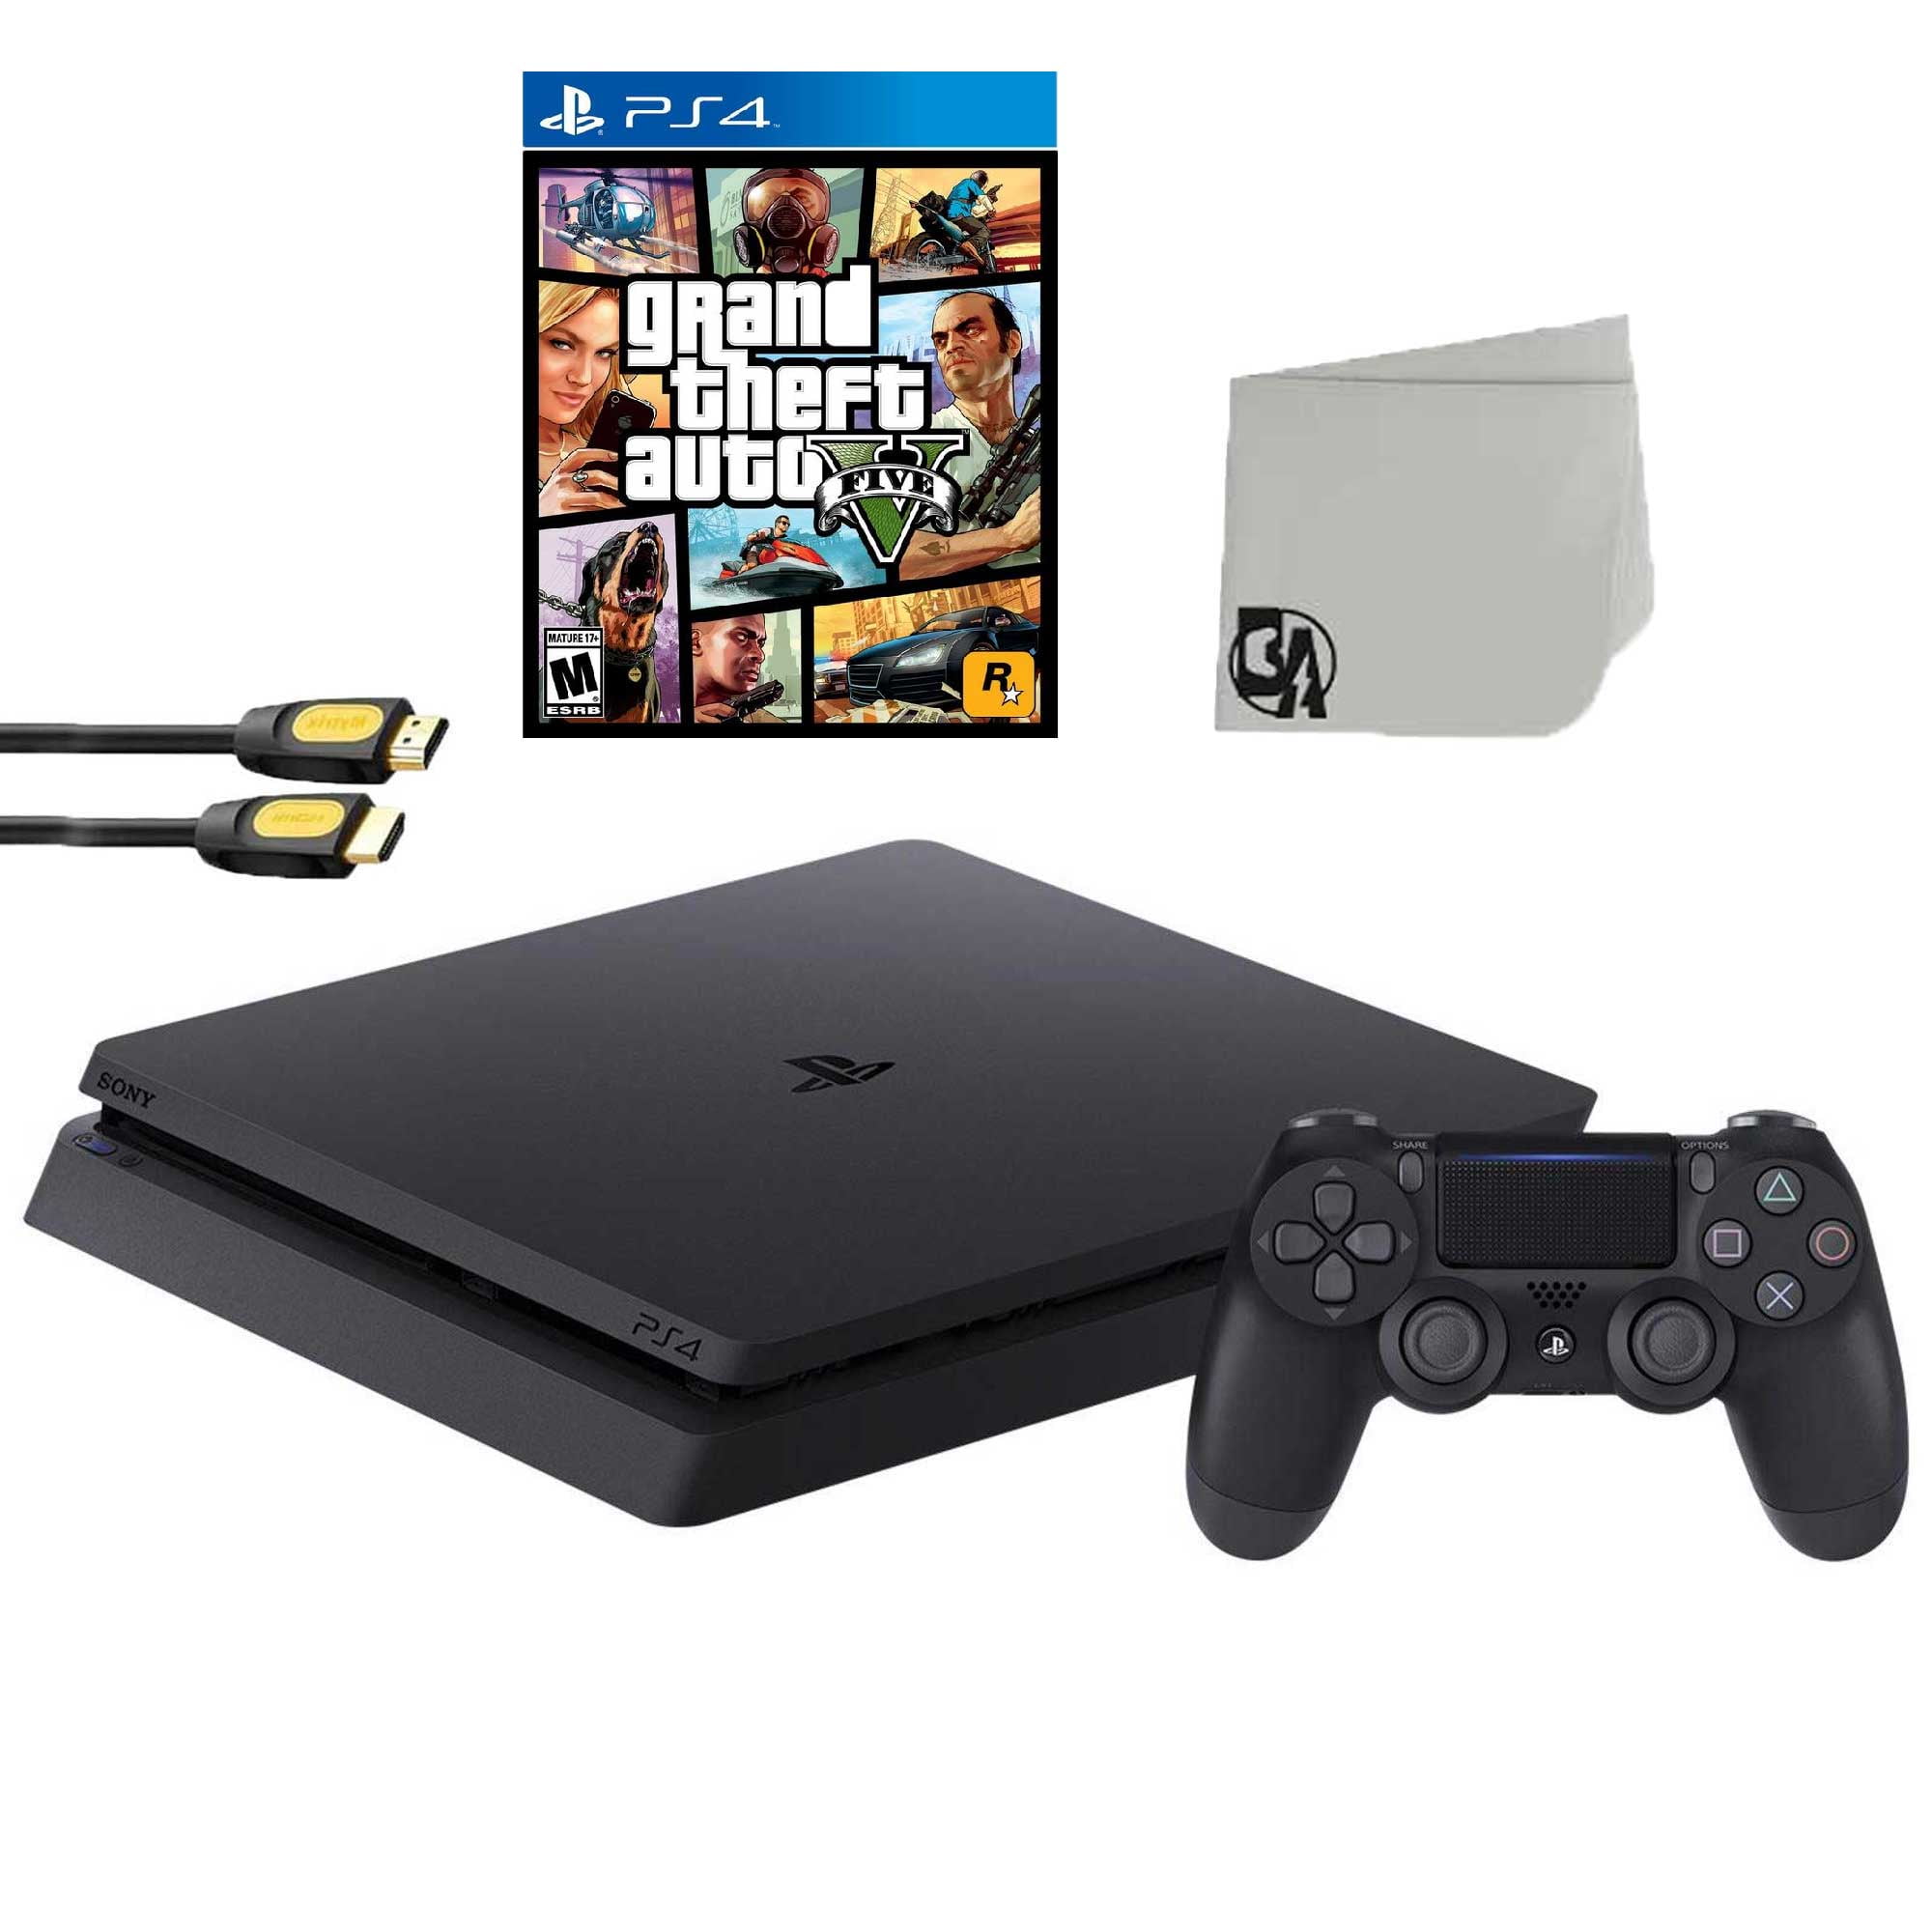 Minearbejder Give Guggenheim Museum Sony 2215A PlayStation 4 Slim 500GB Gaming Console Black with Call Of Duty  Black Ops 3 Game BOLT AXTION Bundle Lke New - Walmart.com